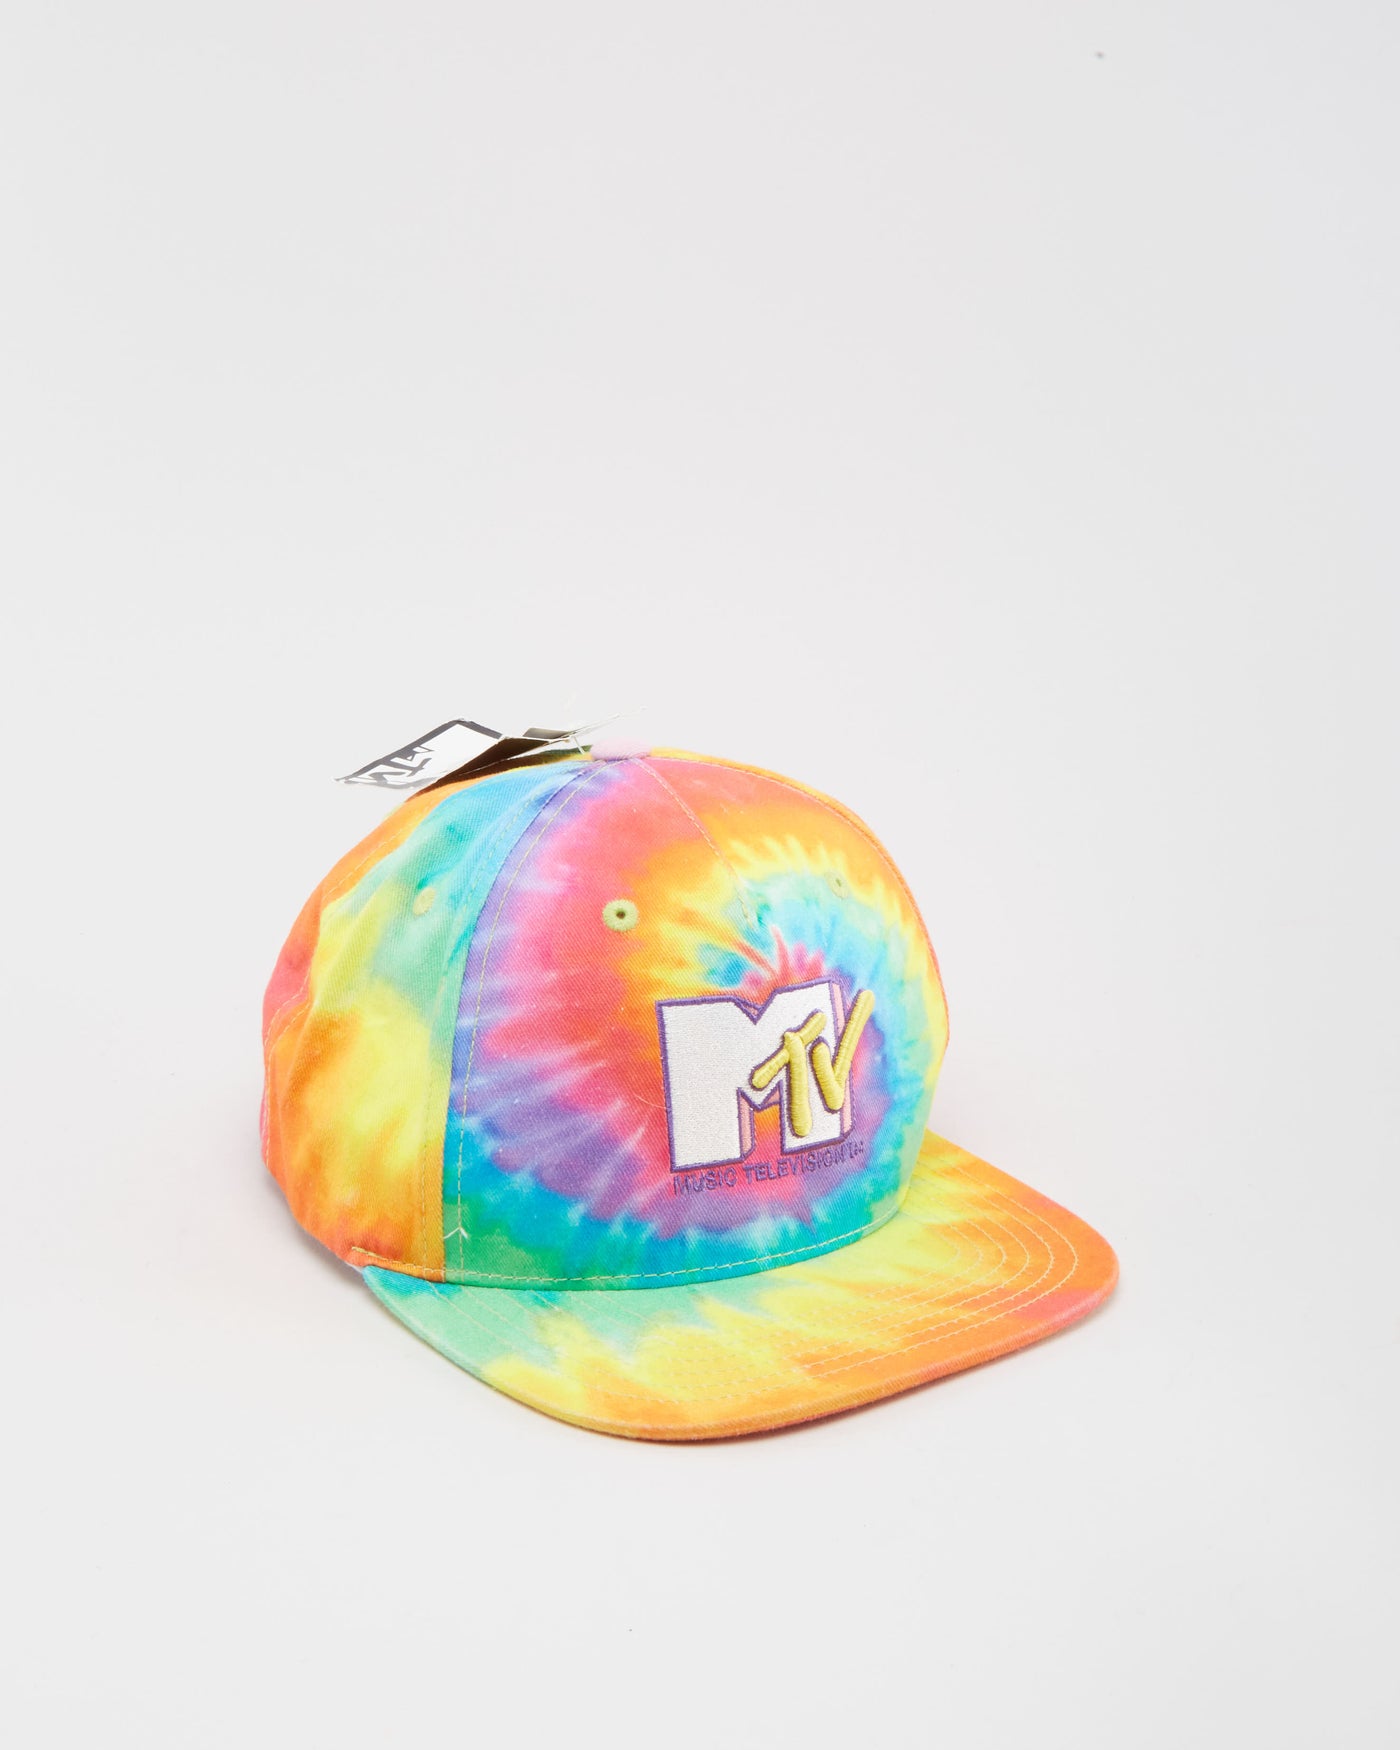 New With Tags MTV Tie Dye Snapback